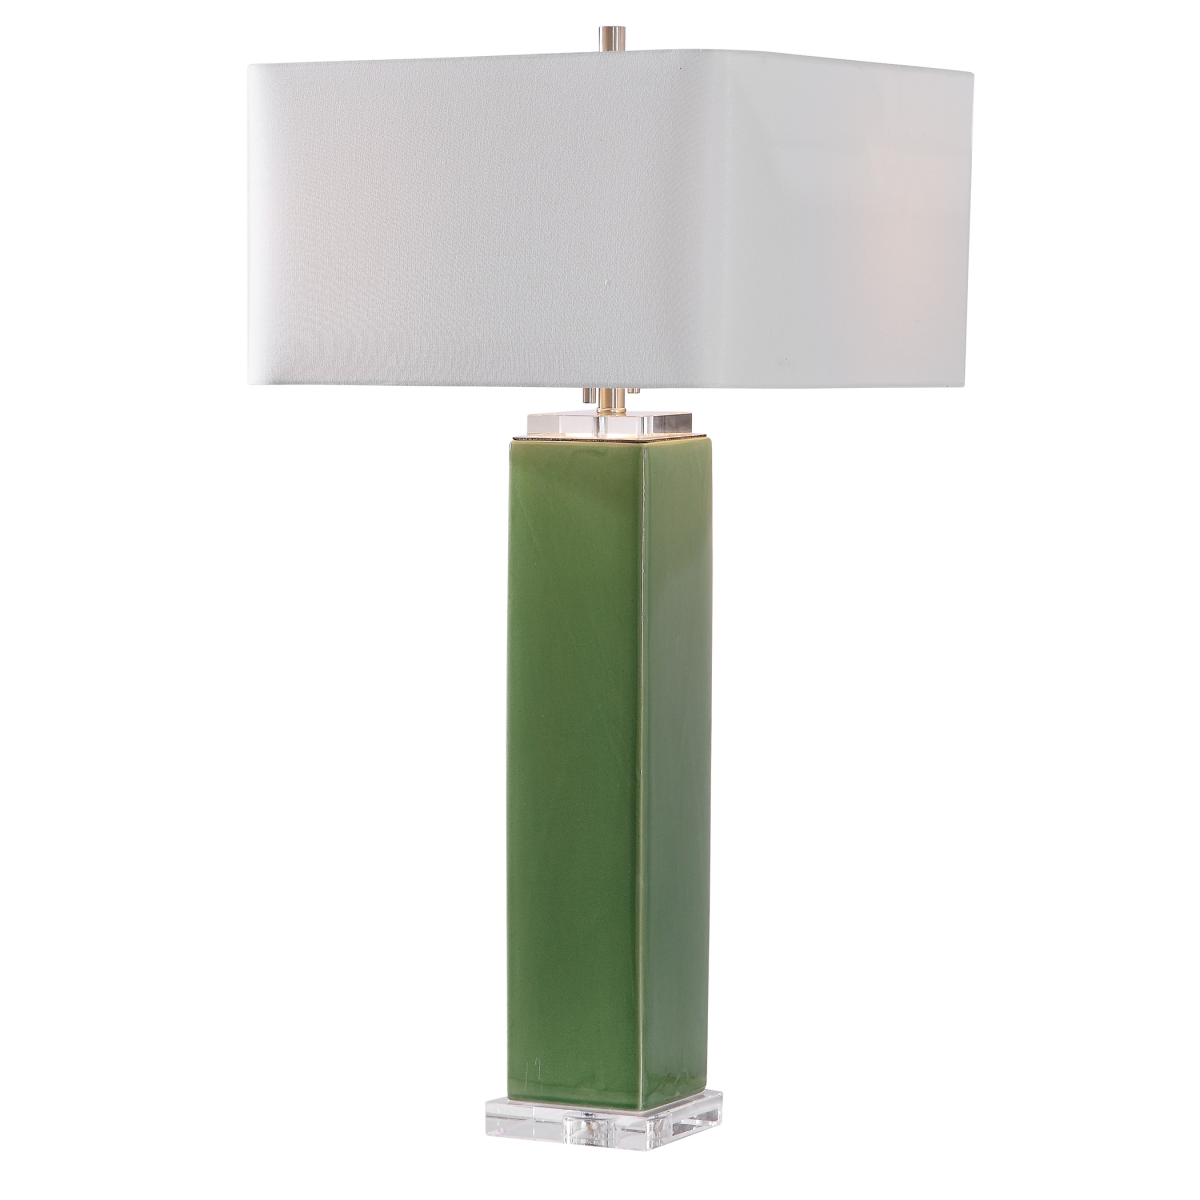 Picture of 212 Main 26410-1 Aneeza Tropical Green Table Lamp